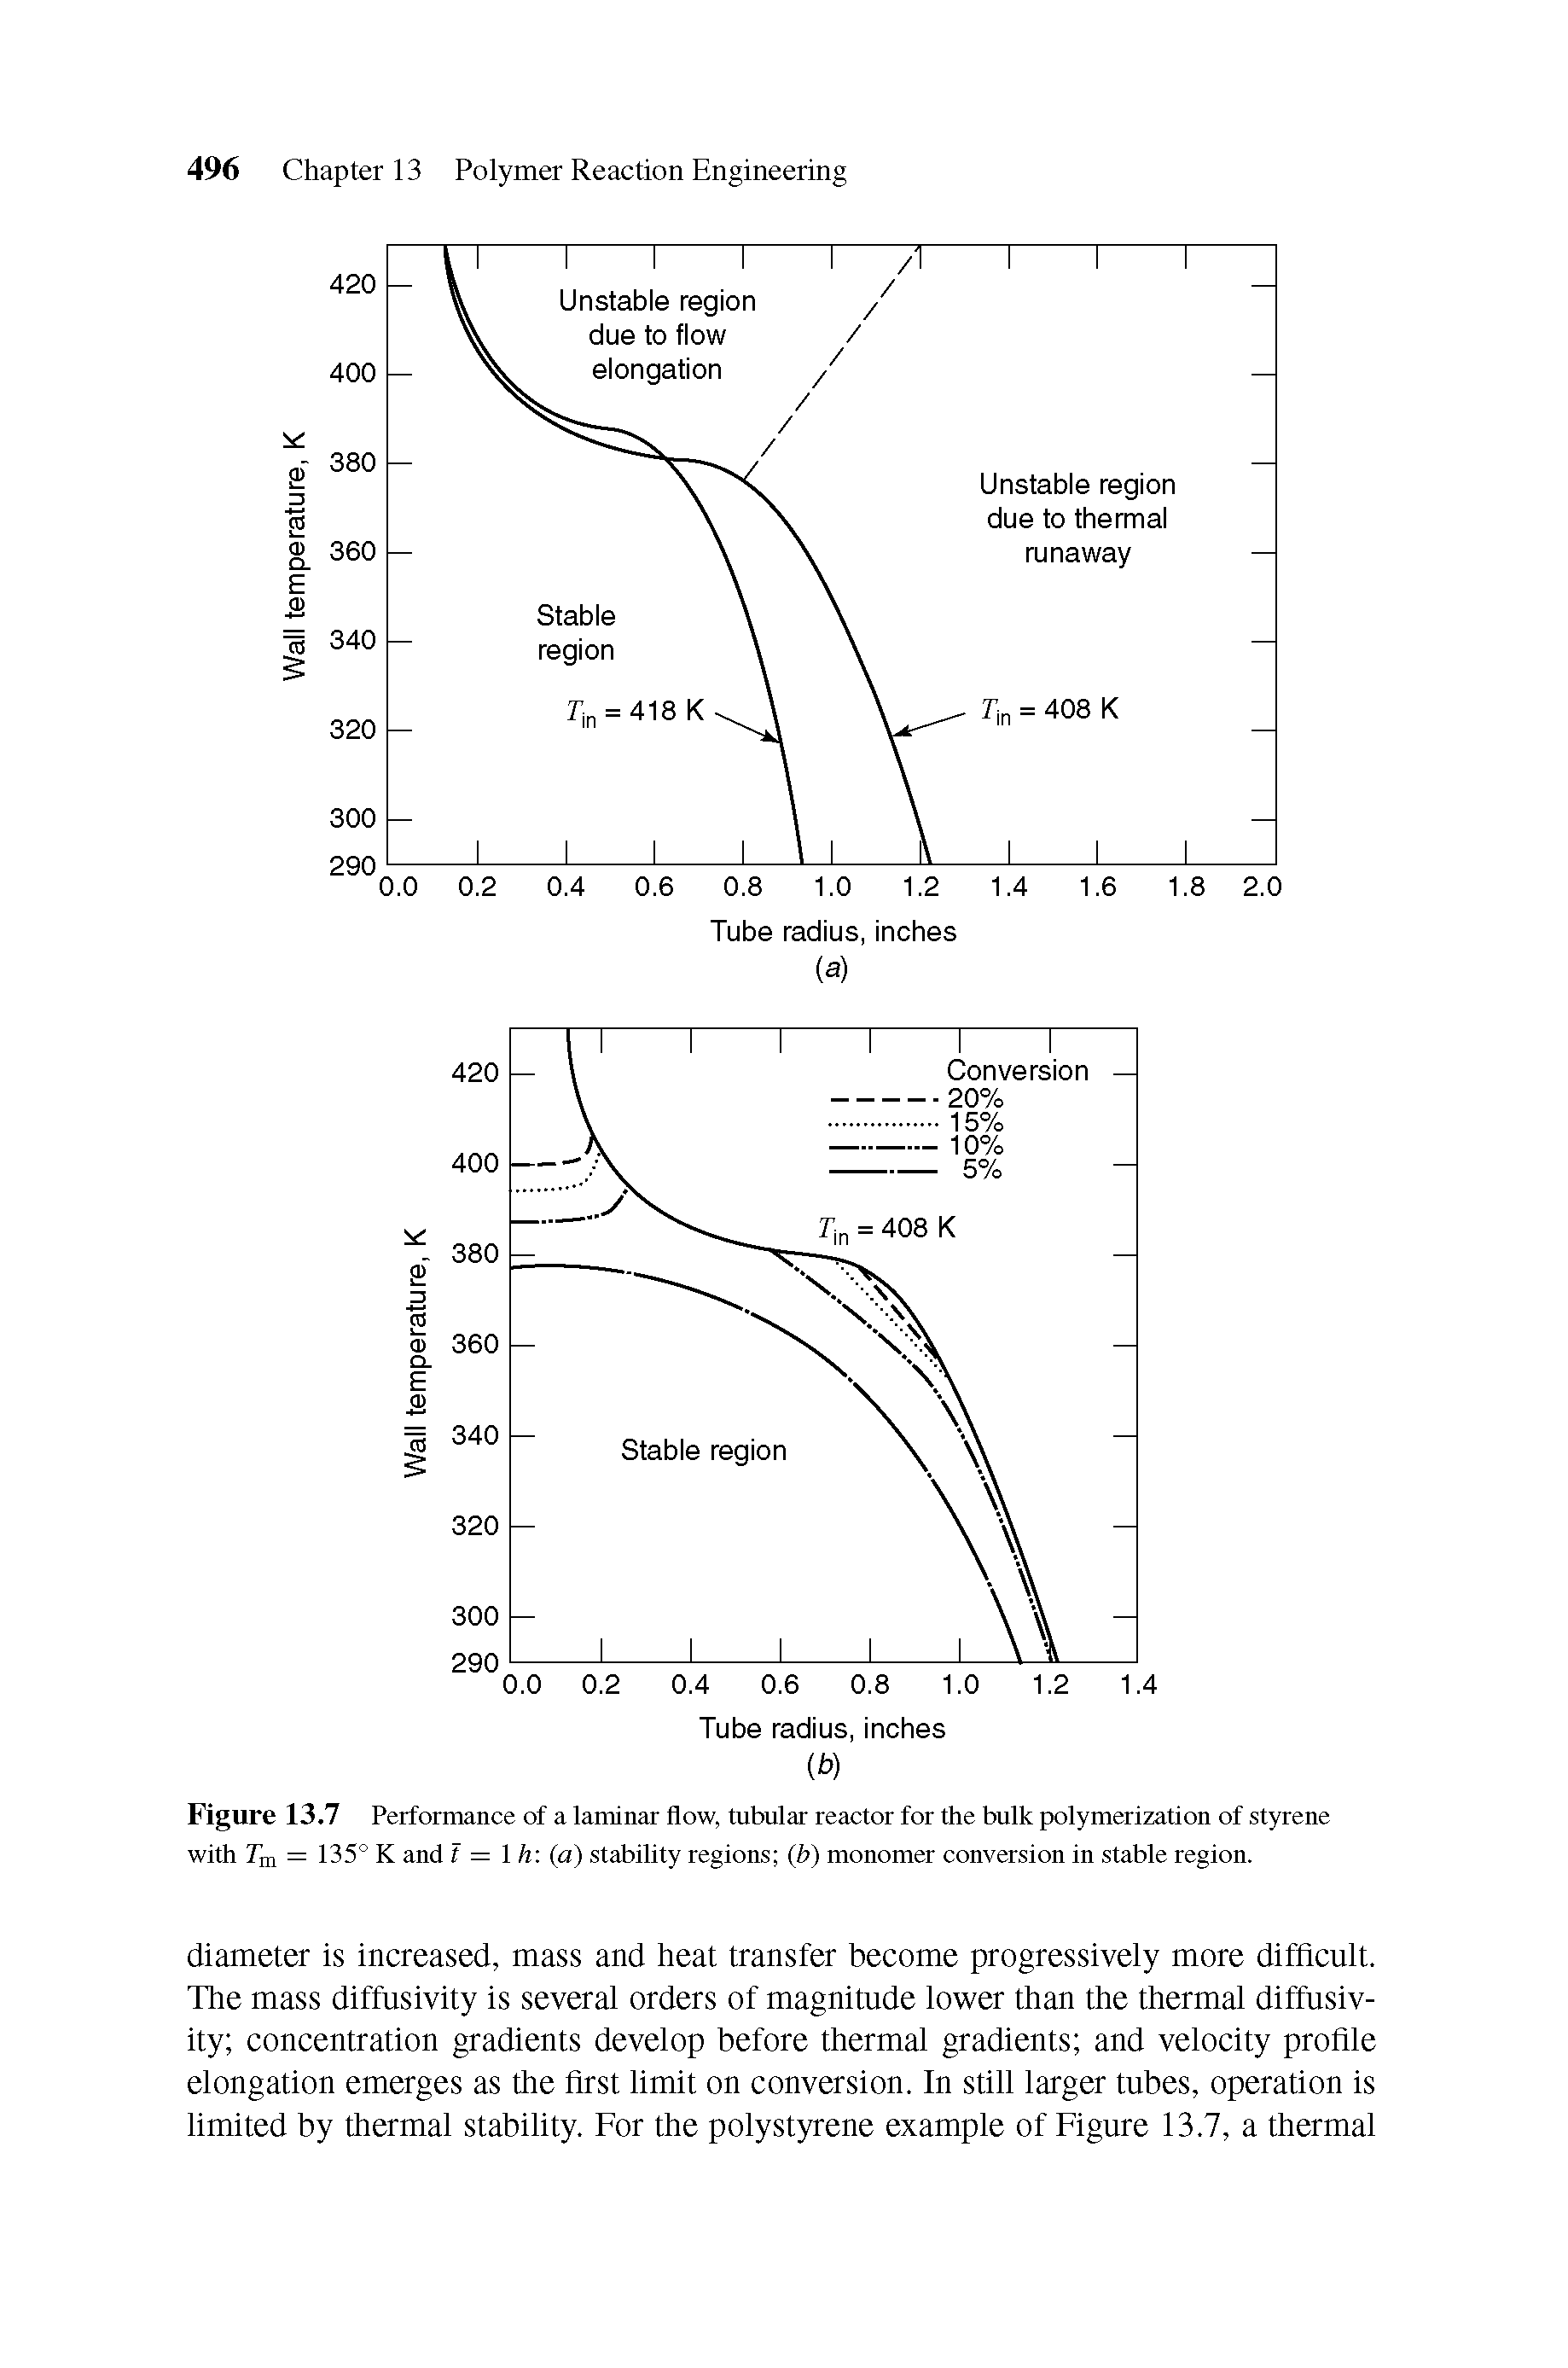 Figure 13.7 Performance of a laminar flow, tubular reactor for the bulk polymerization of styrene with Tm = 135° K and i = Ih (a) stability regions (b) monomer conversion in stable region.